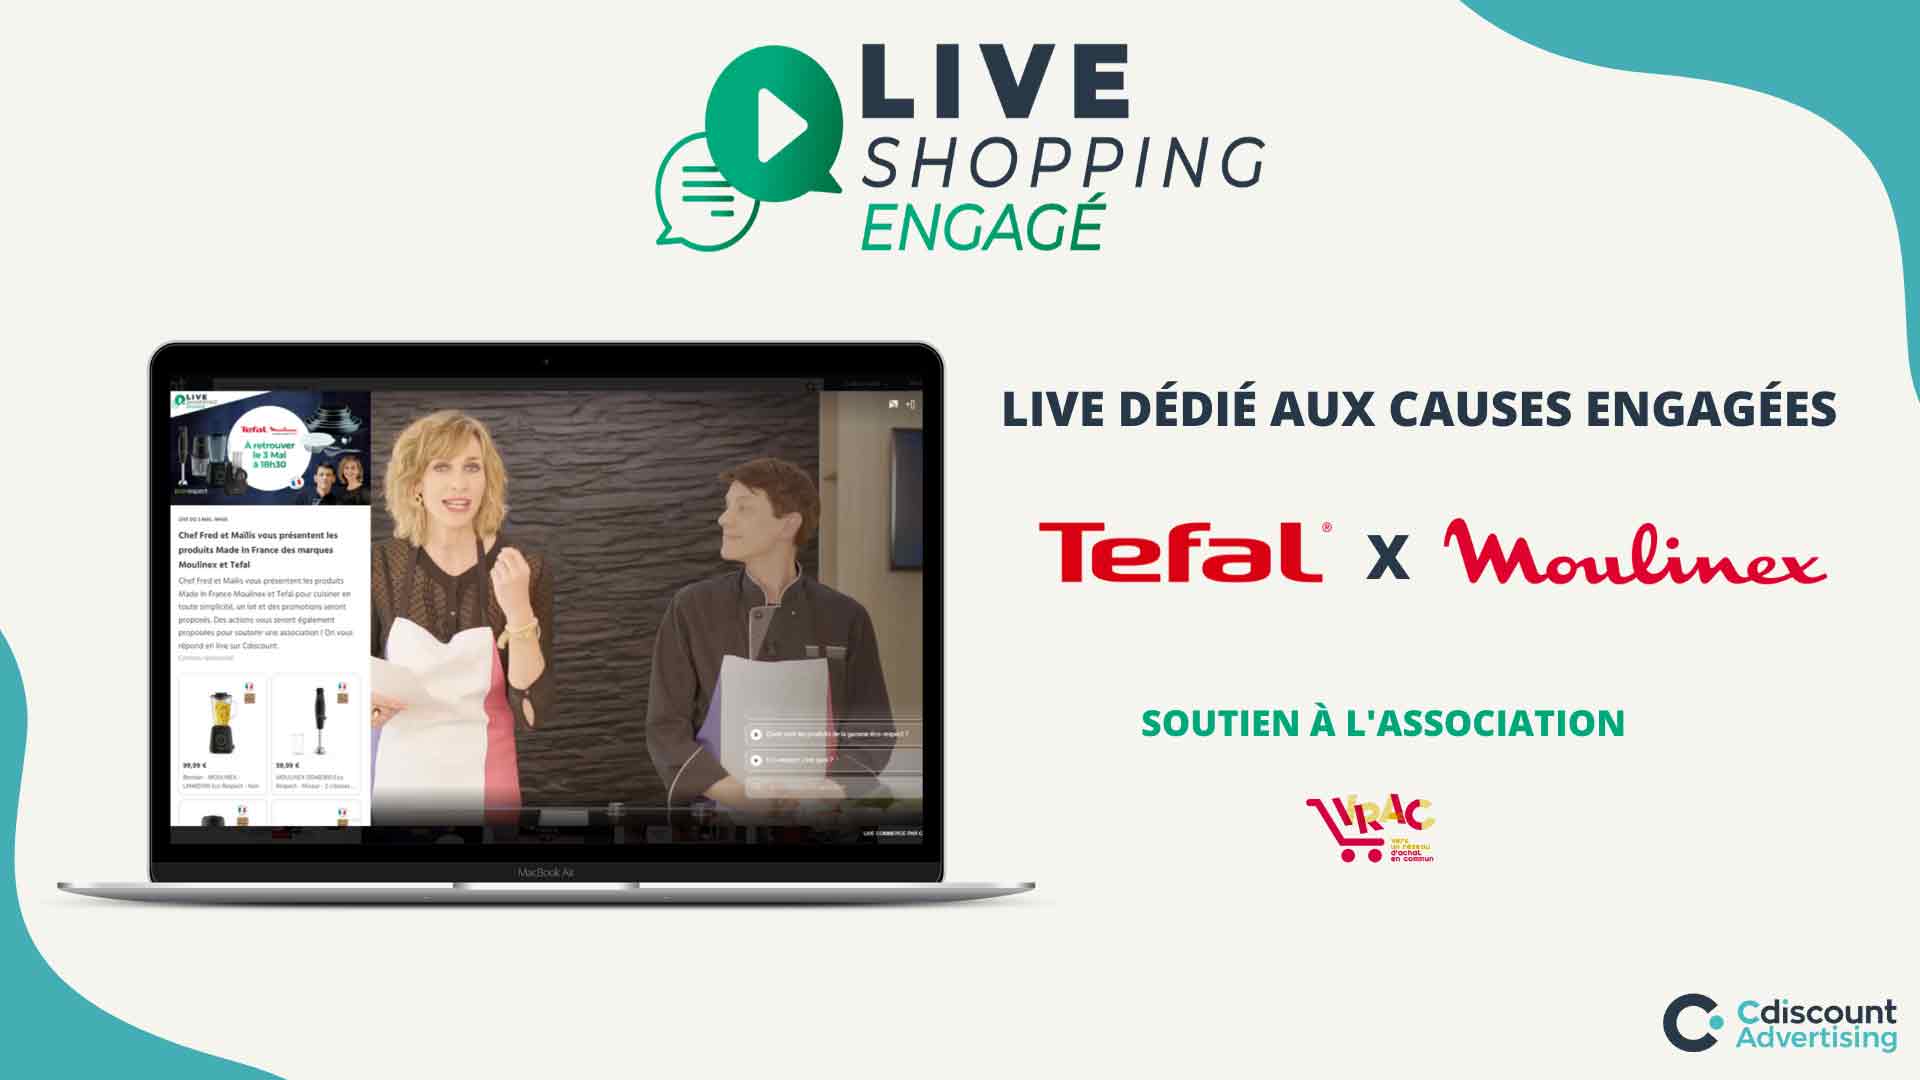 Cdiscount Advertising launches Engaged Live Shopping - Cdiscount